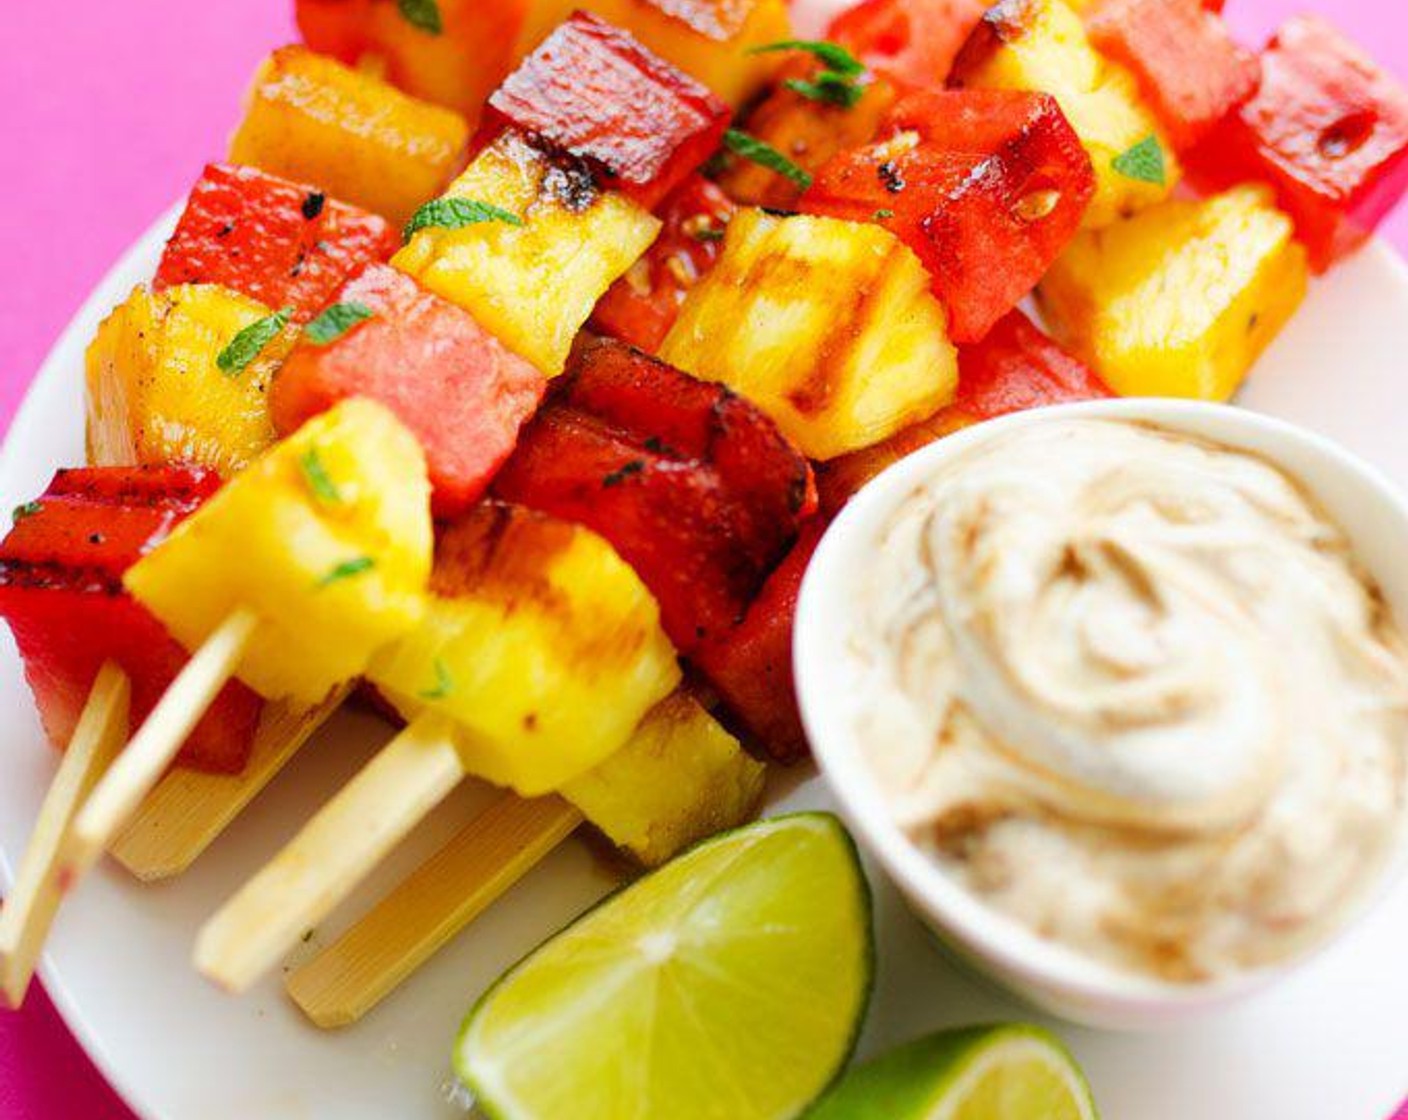 Watermelon and Pineapple Grilled Fruit Skewers